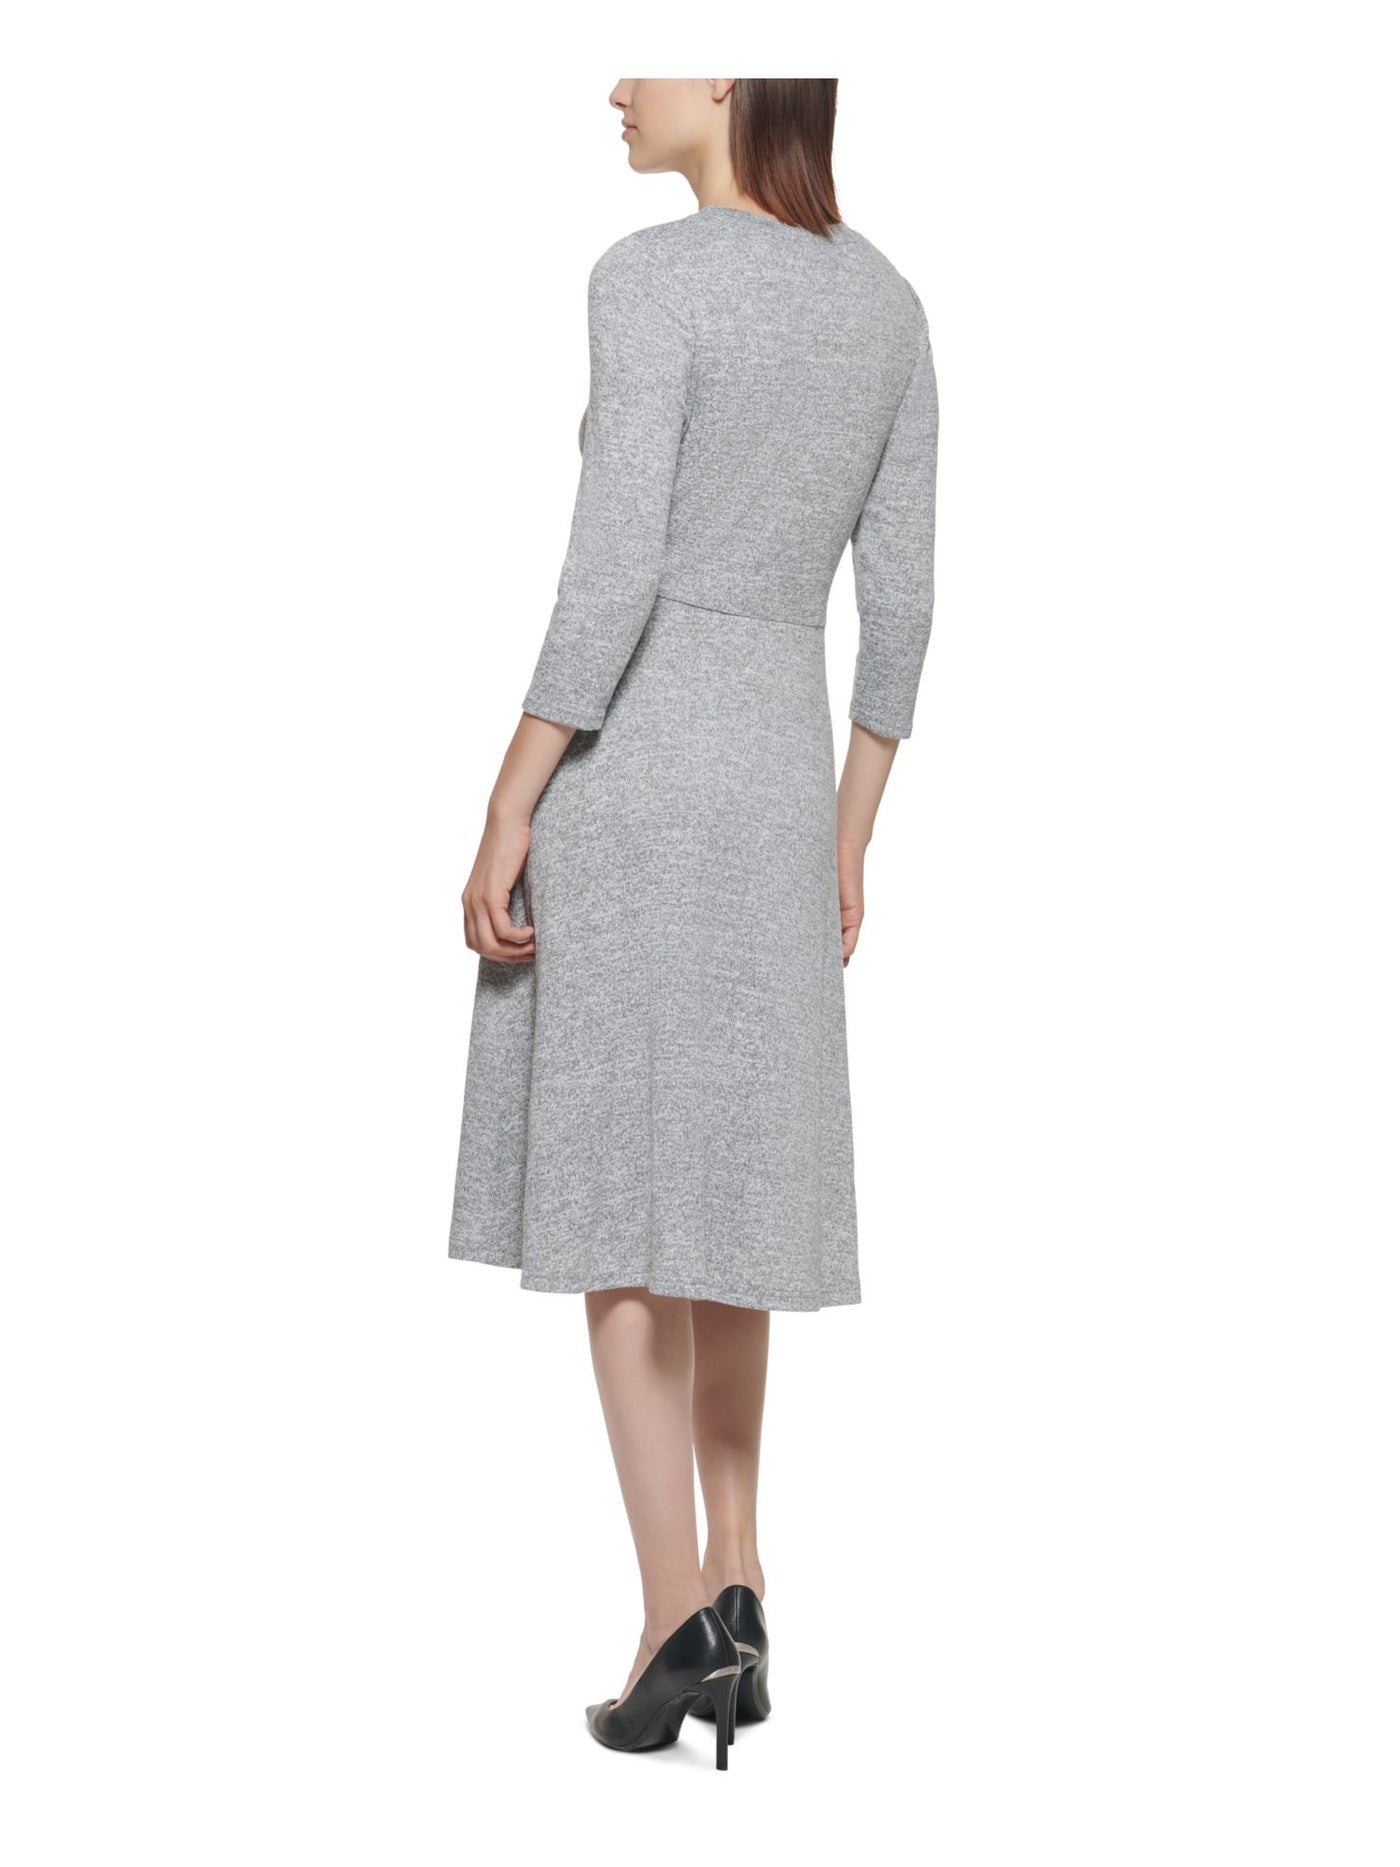 CALVIN KLEIN Womens Gray Stretch Ruched Pull-over Style Heather 3/4 Sleeve Round Neck Midi Wear To Work Shift Dress 2